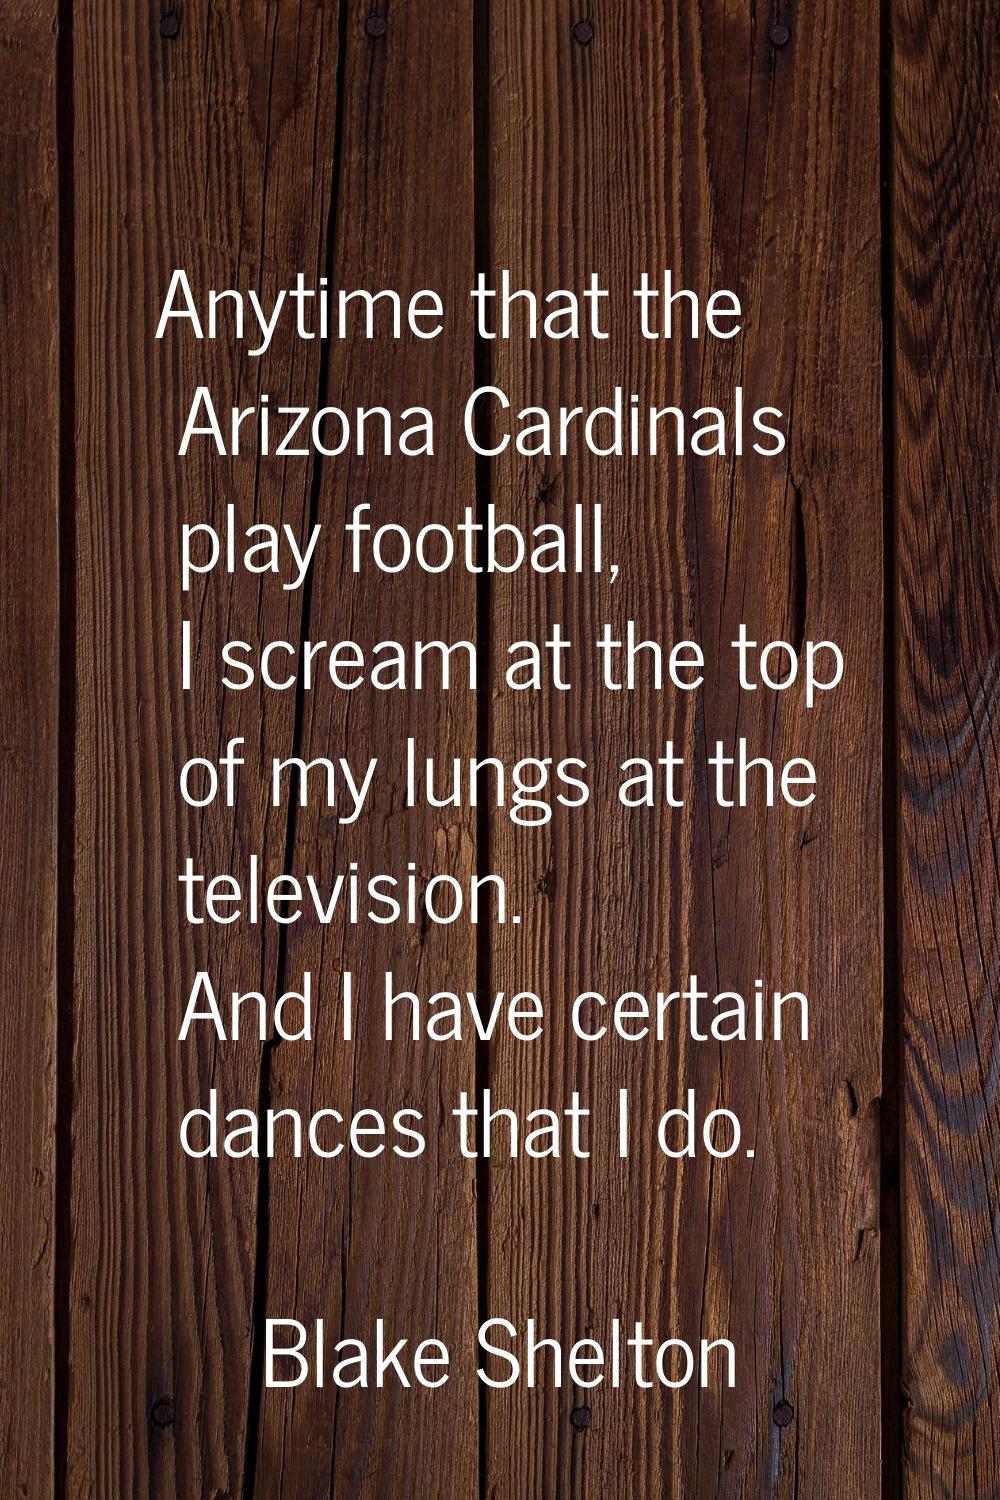 Anytime that the Arizona Cardinals play football, I scream at the top of my lungs at the television